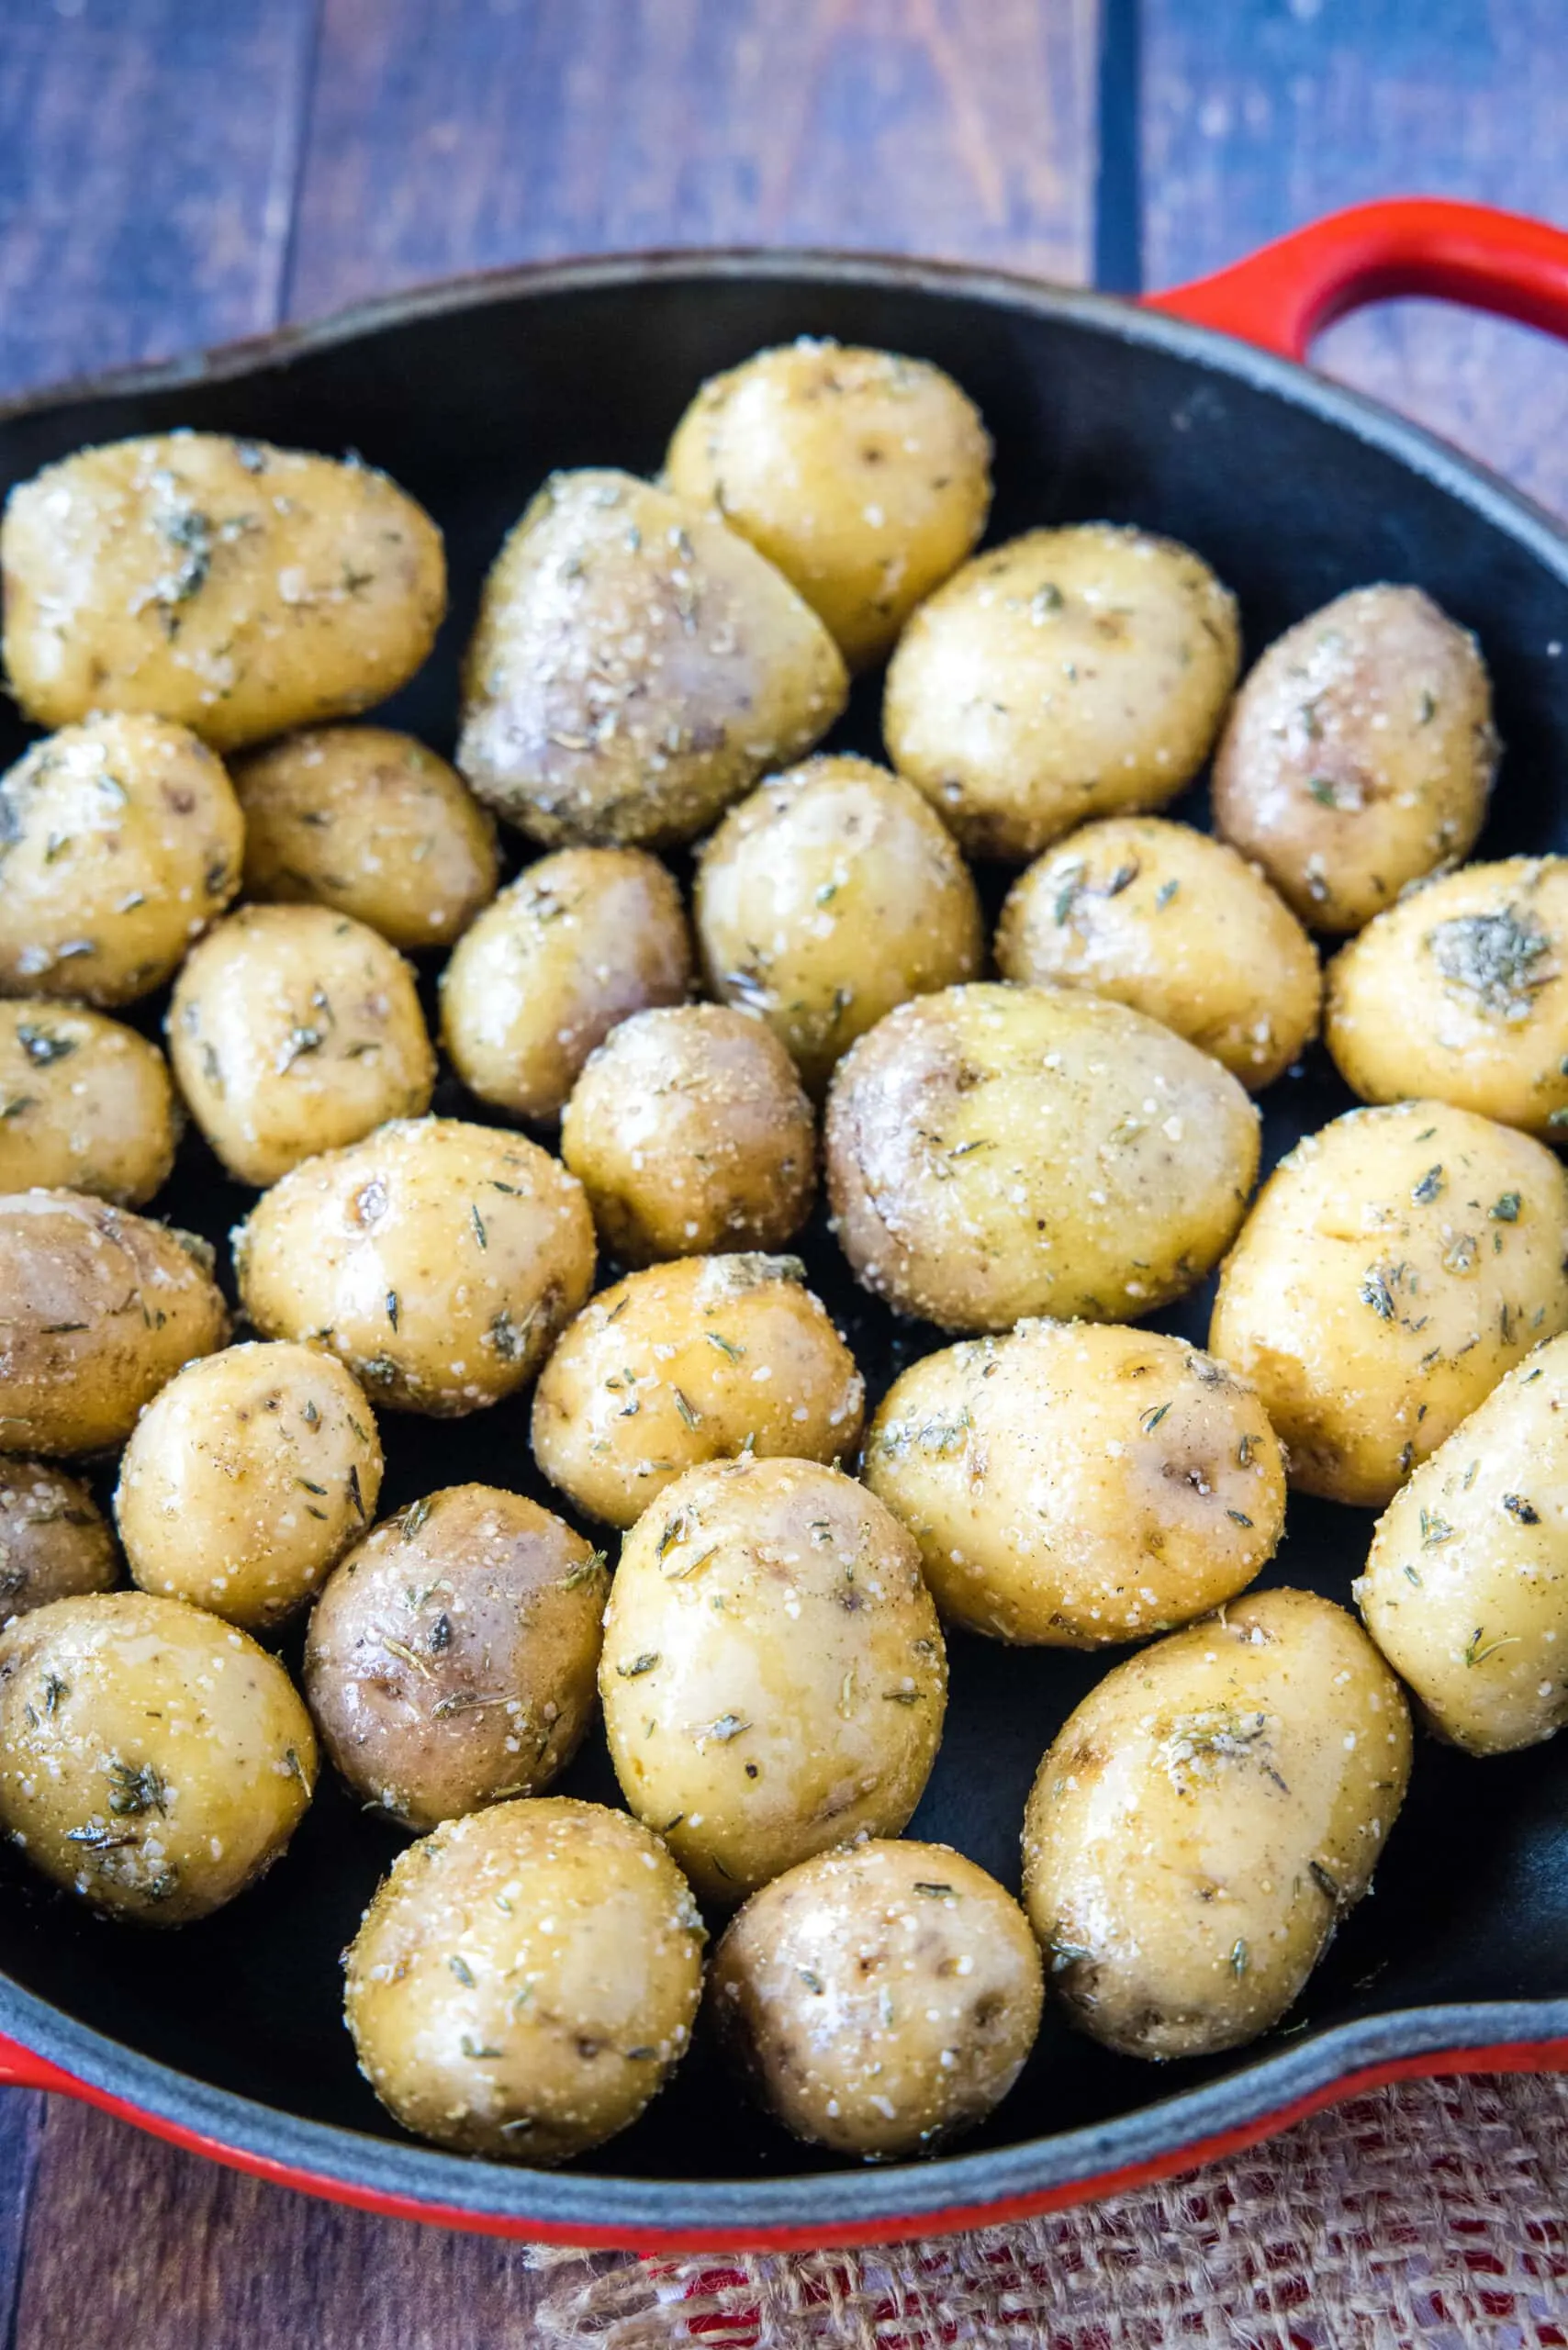 potatoes with seasoning on ready for the smoker